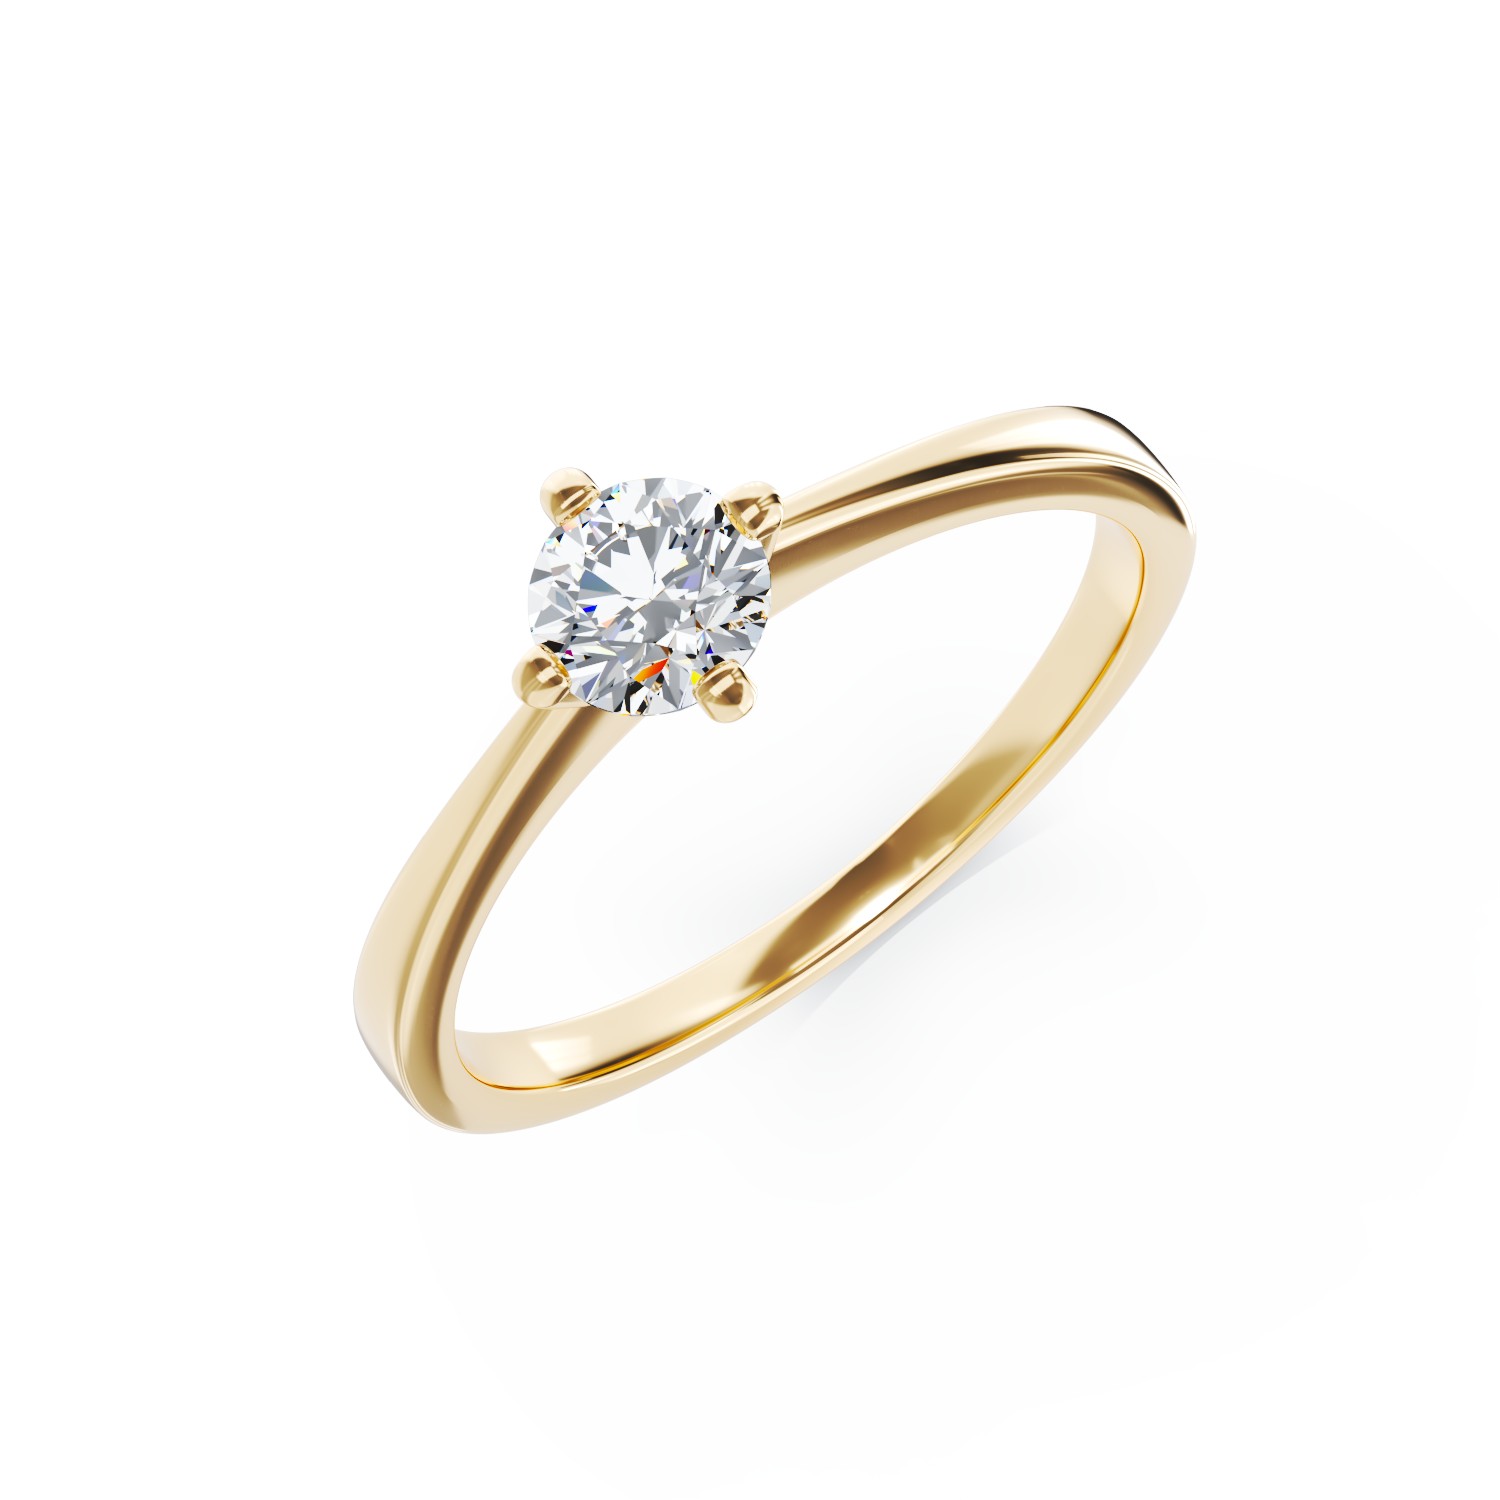 18K yellow gold engagement ring with 0.405ct solitaire diamond